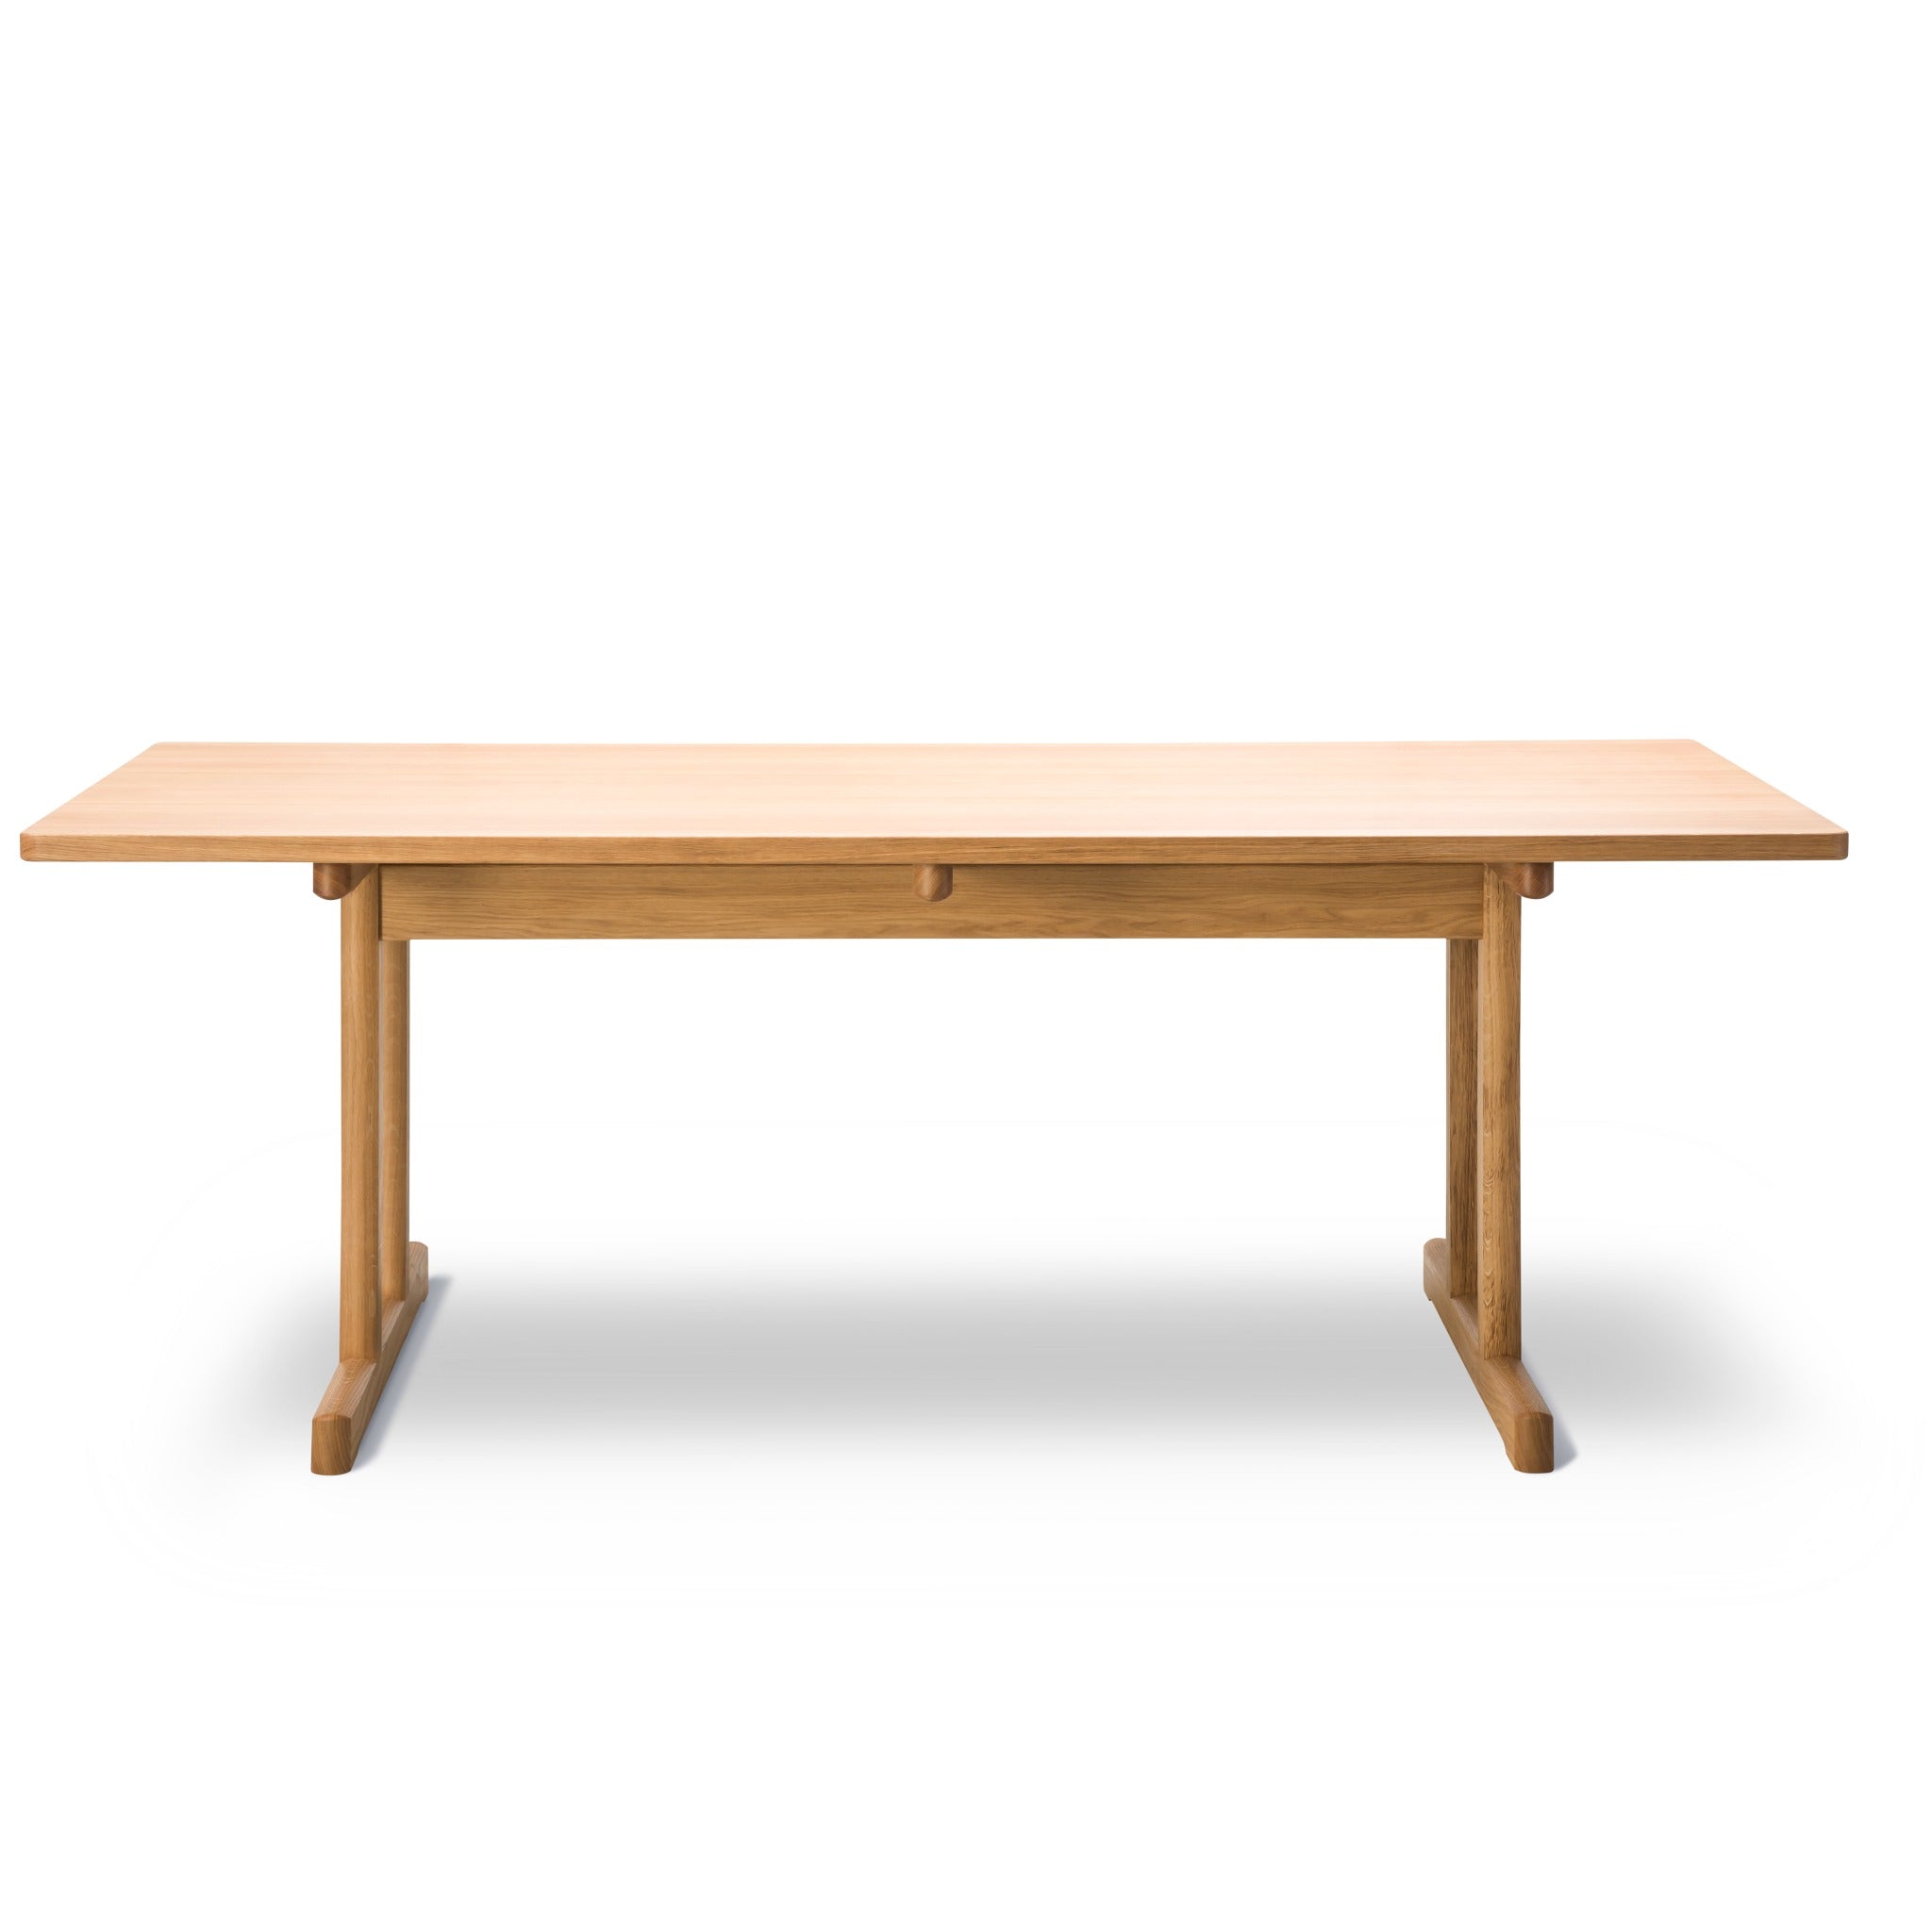 6286 Mogensen Table by Fredericia